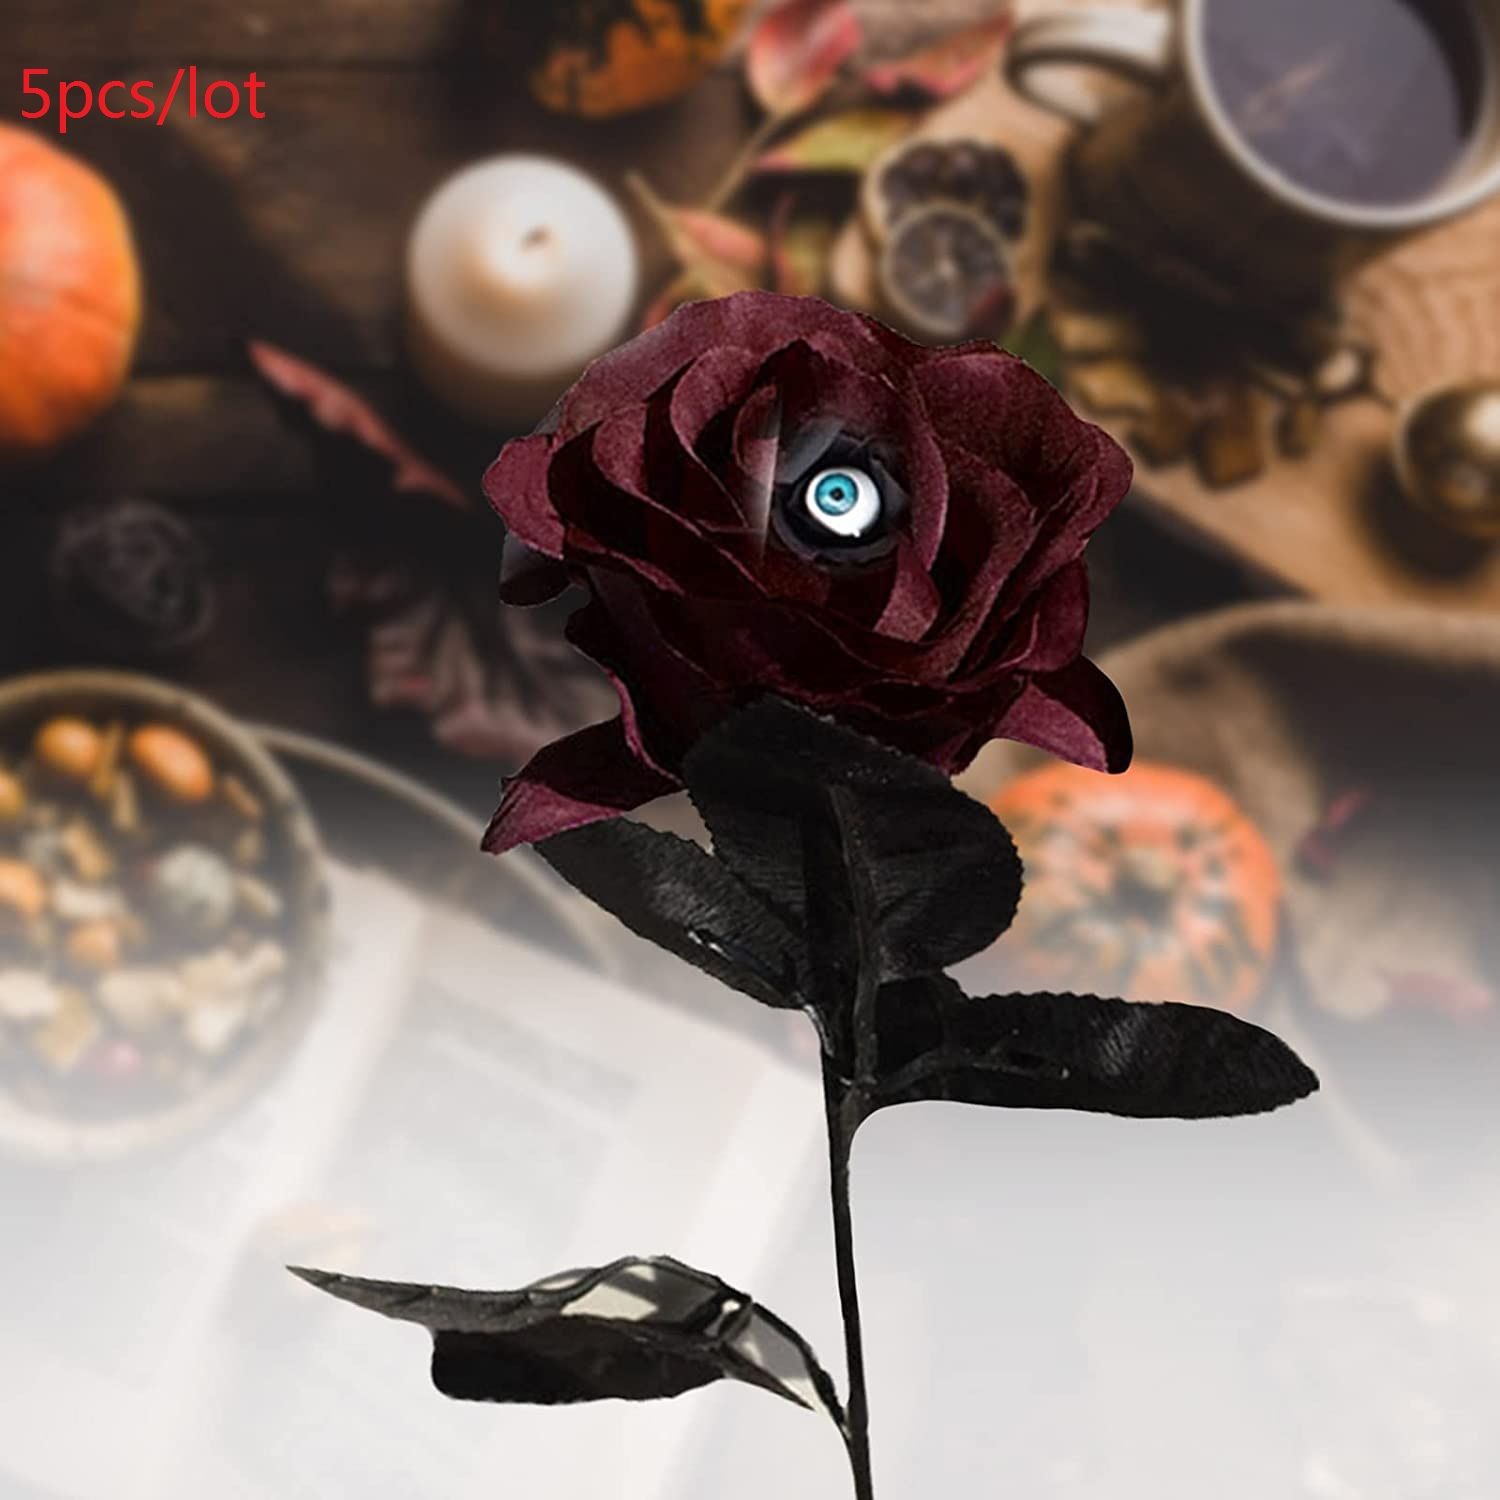 5-pack Halloween Artificial Bloody Roses with Eyeballs Faux Flower Bouquet Halloween Party Decor Sup